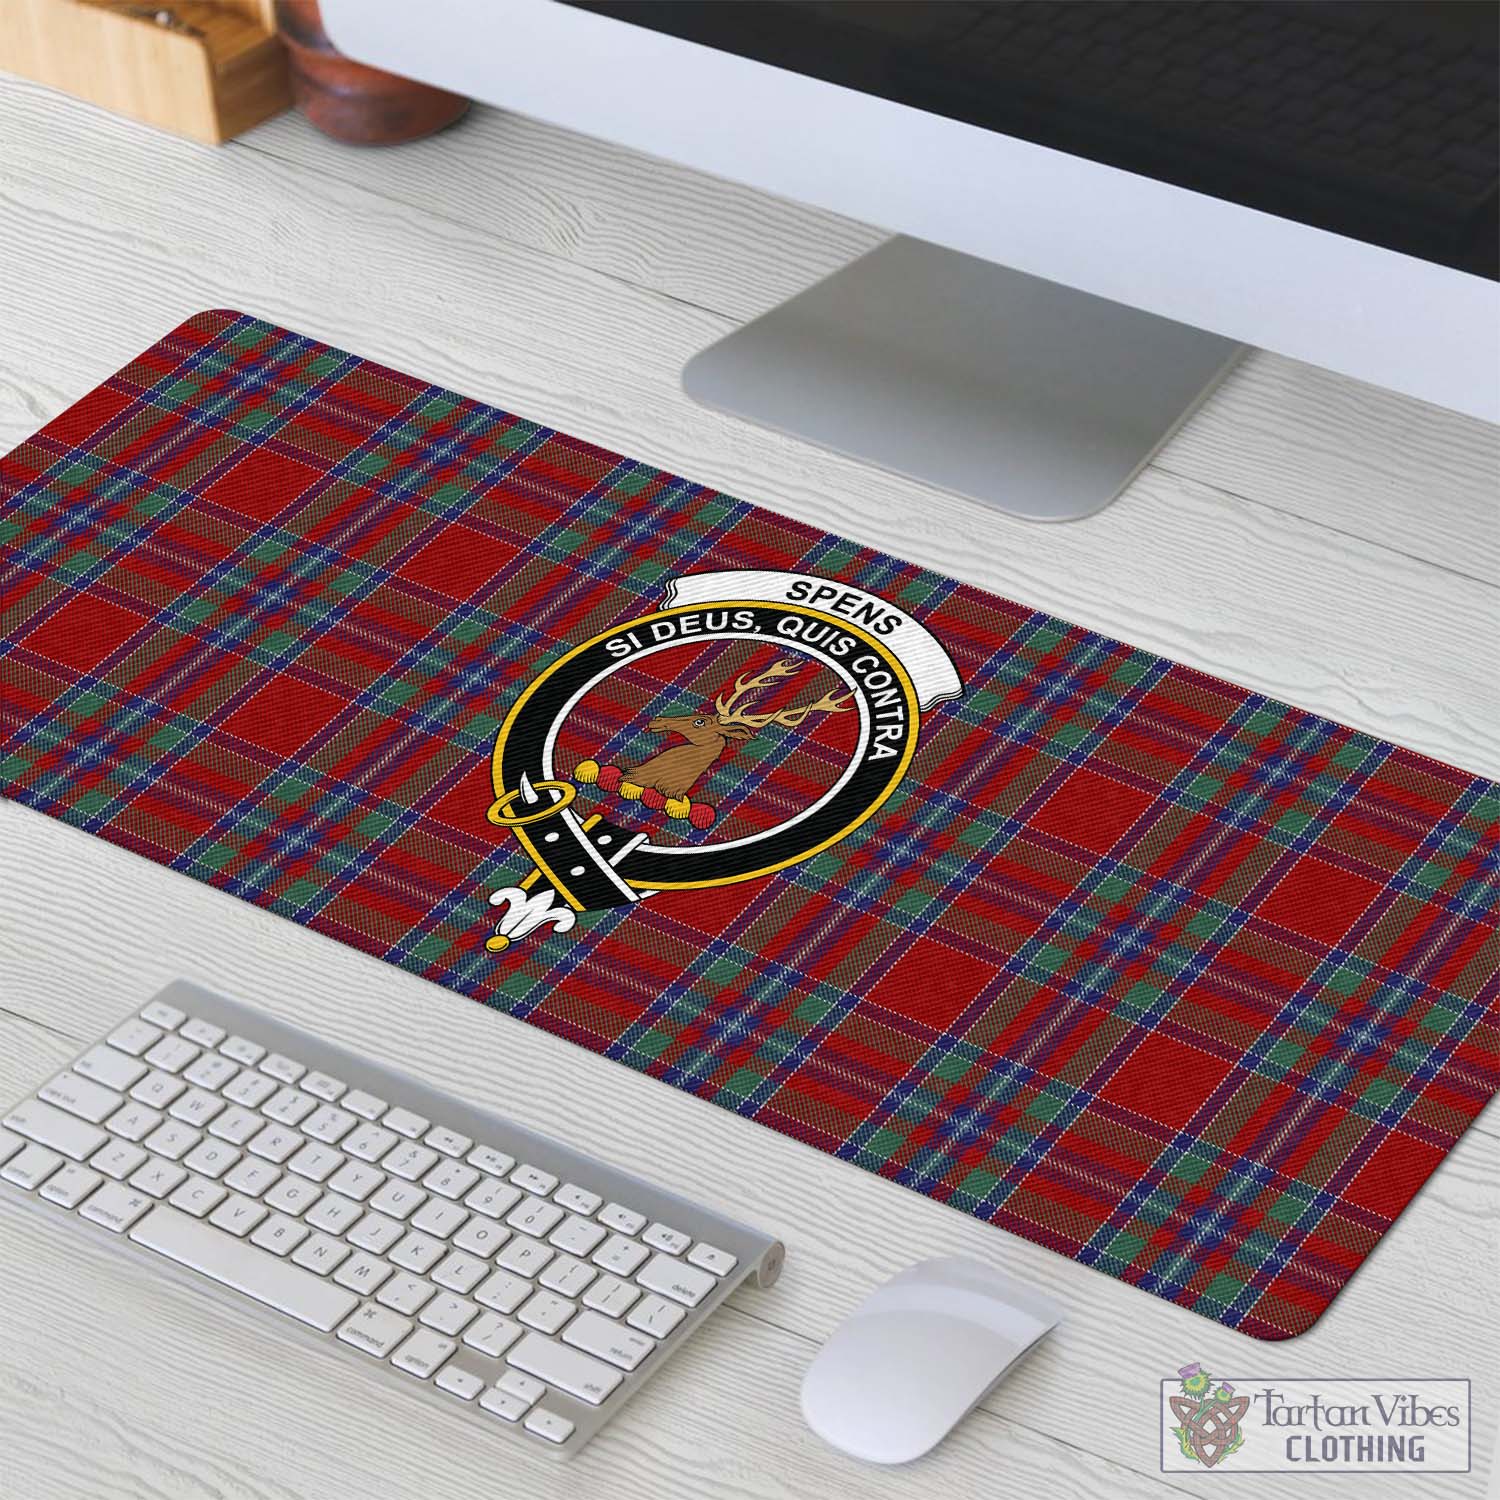 Tartan Vibes Clothing Spens Tartan Mouse Pad with Family Crest